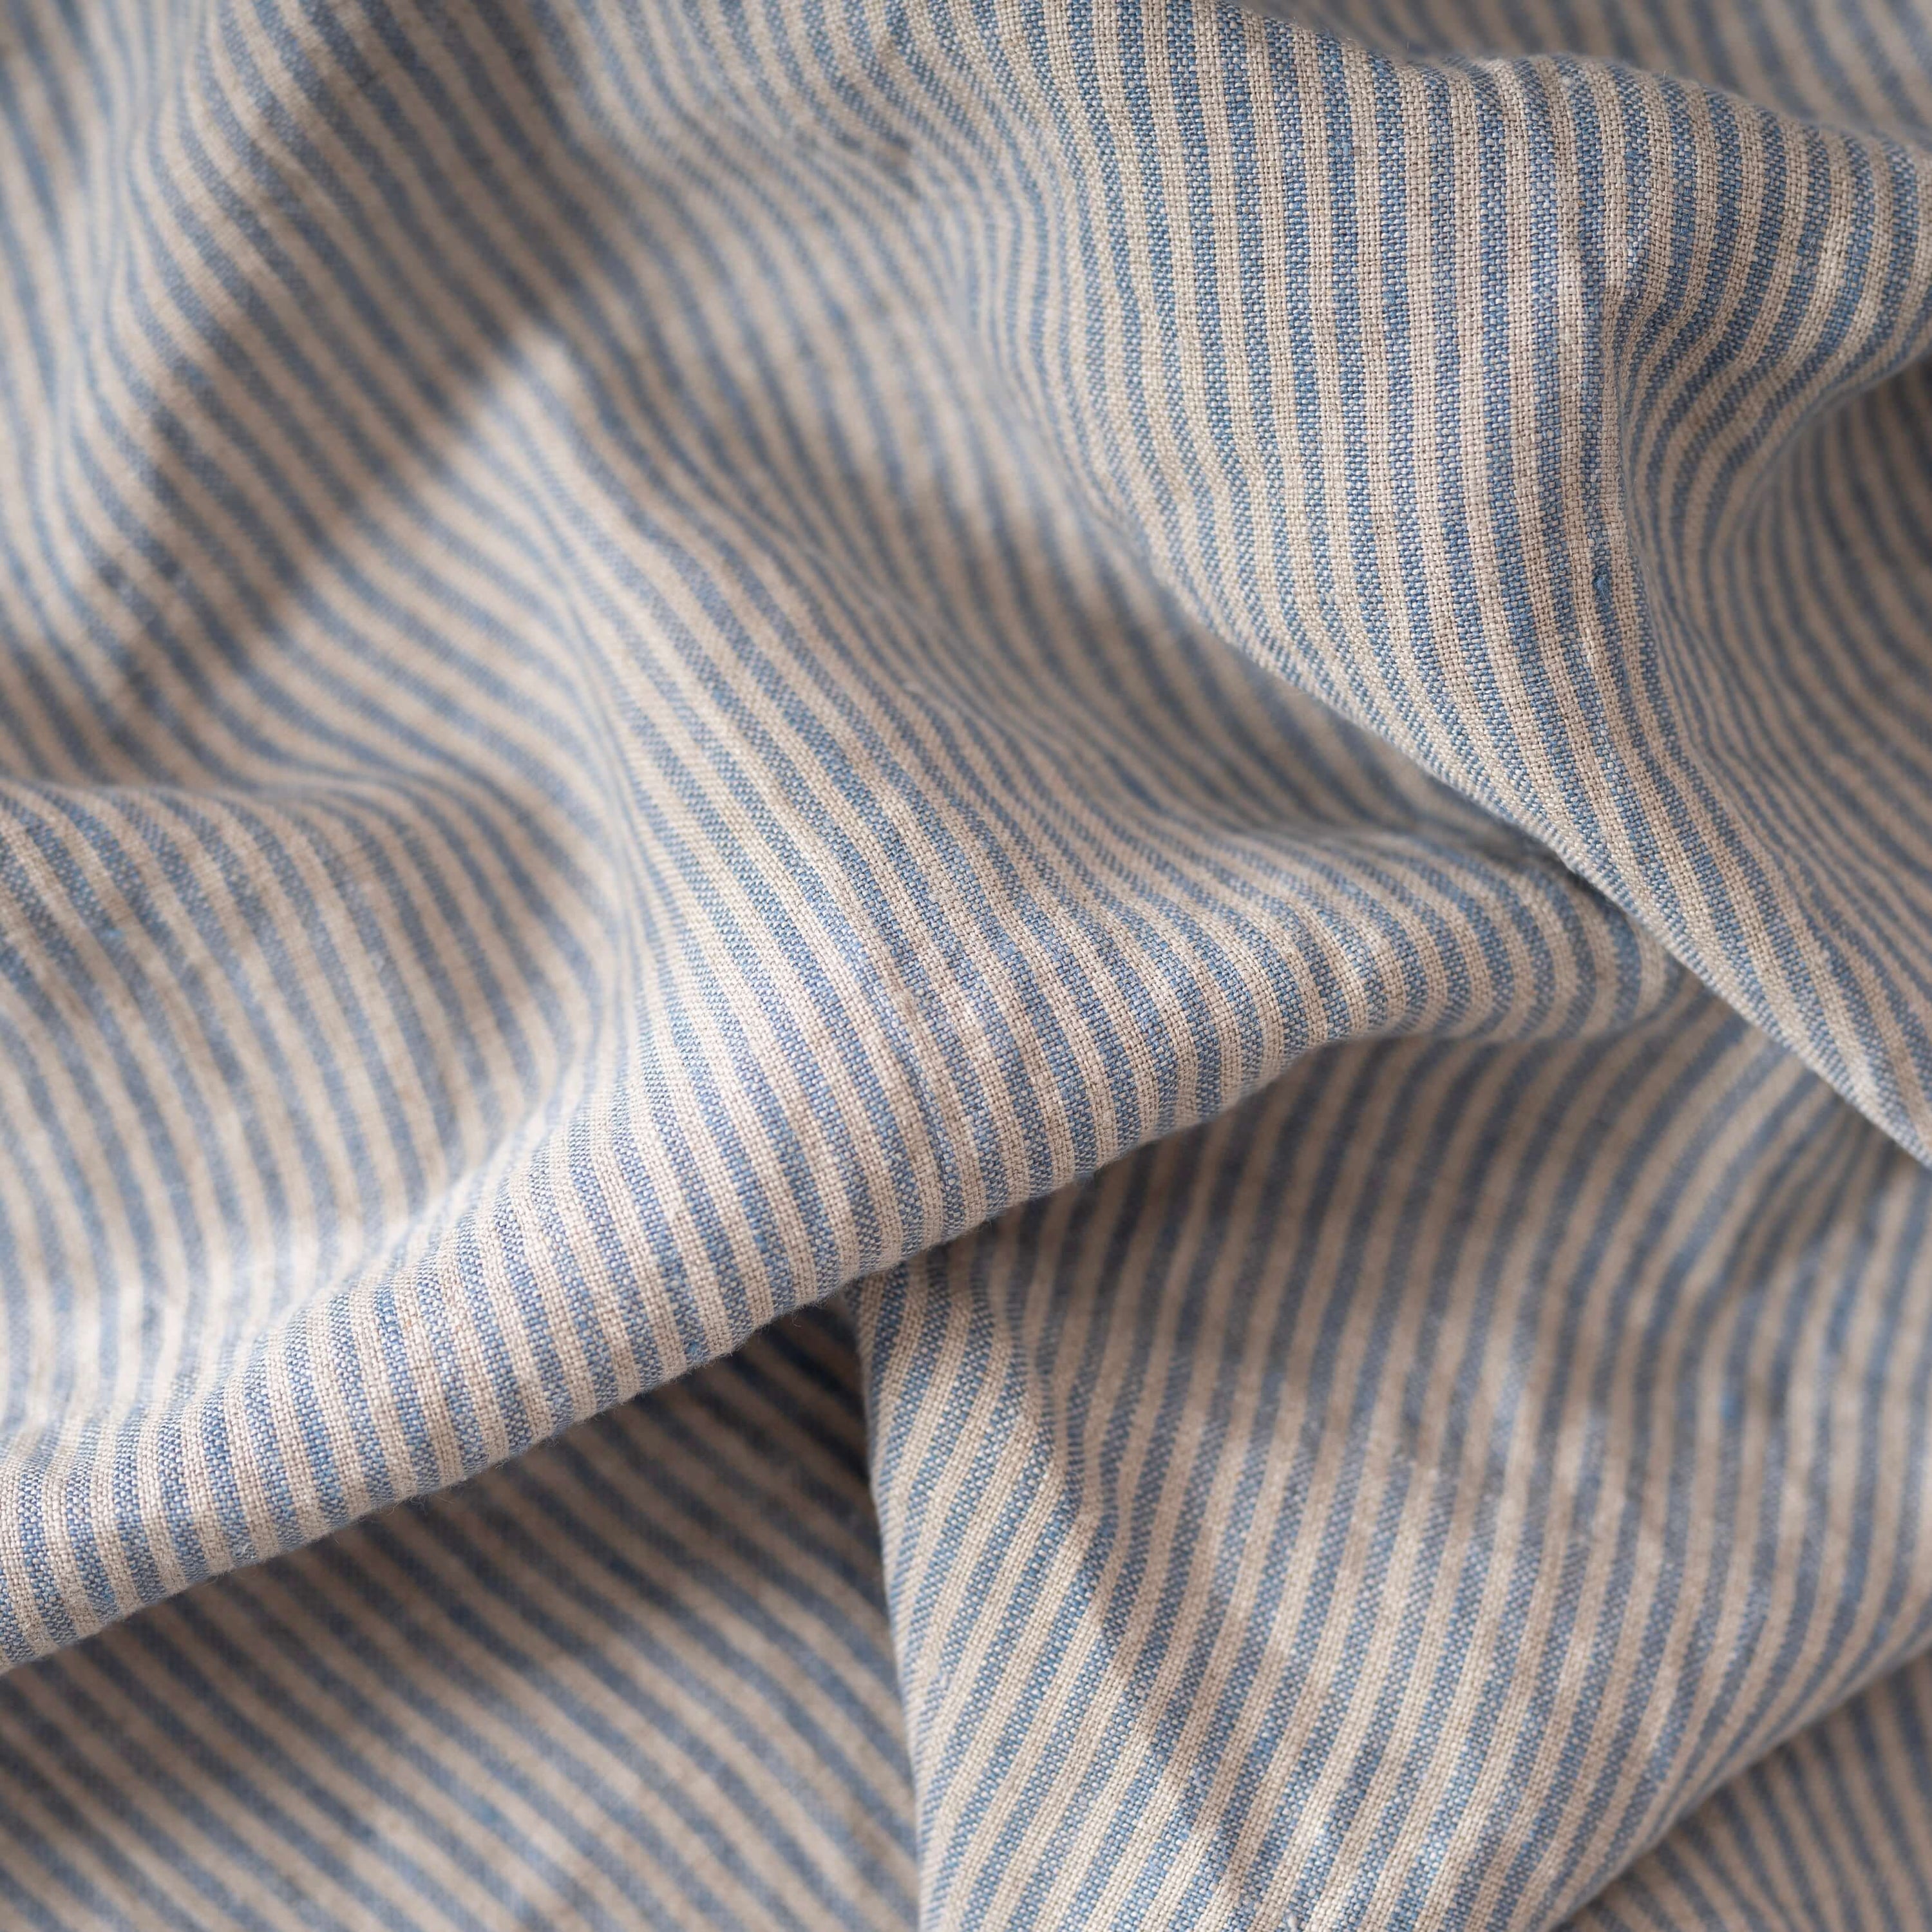 Softened Pure Linen Fabric, Natural Blue Striped Linen Fabric